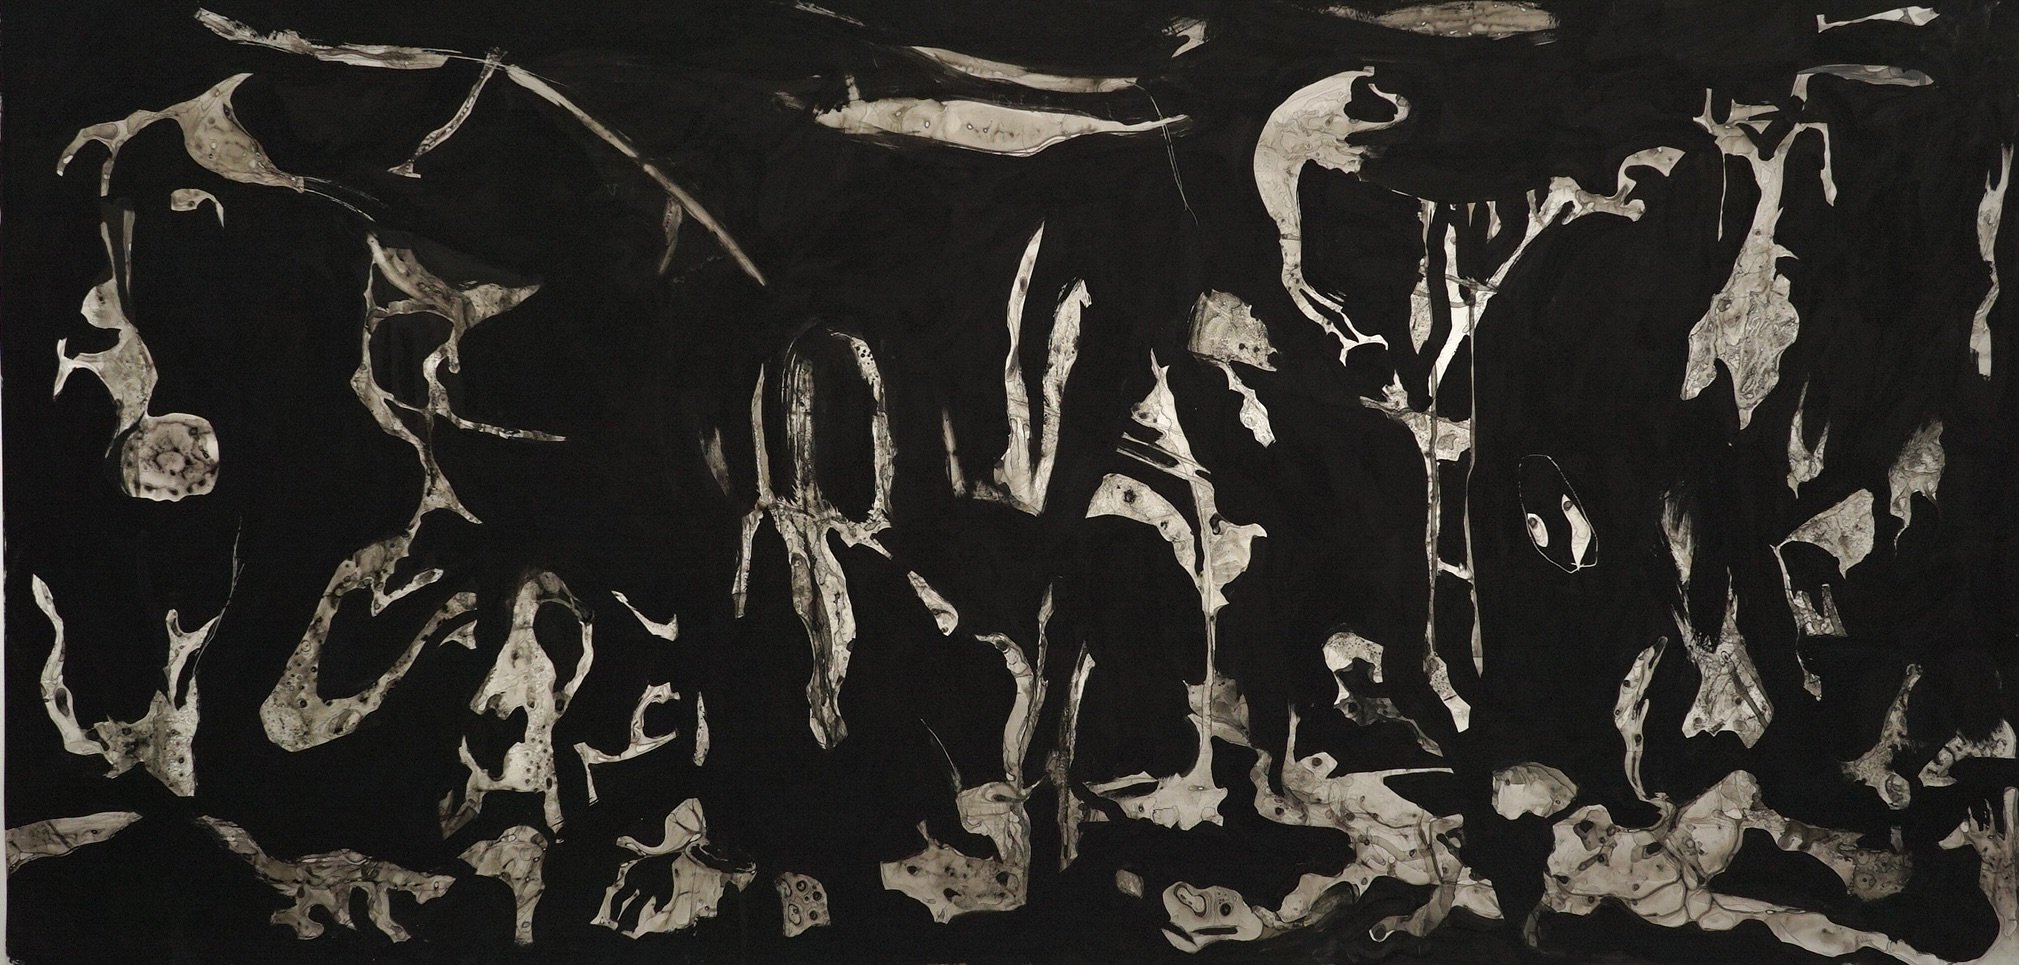 Black Butter. Ink and tempera on paper. 29" x 60"